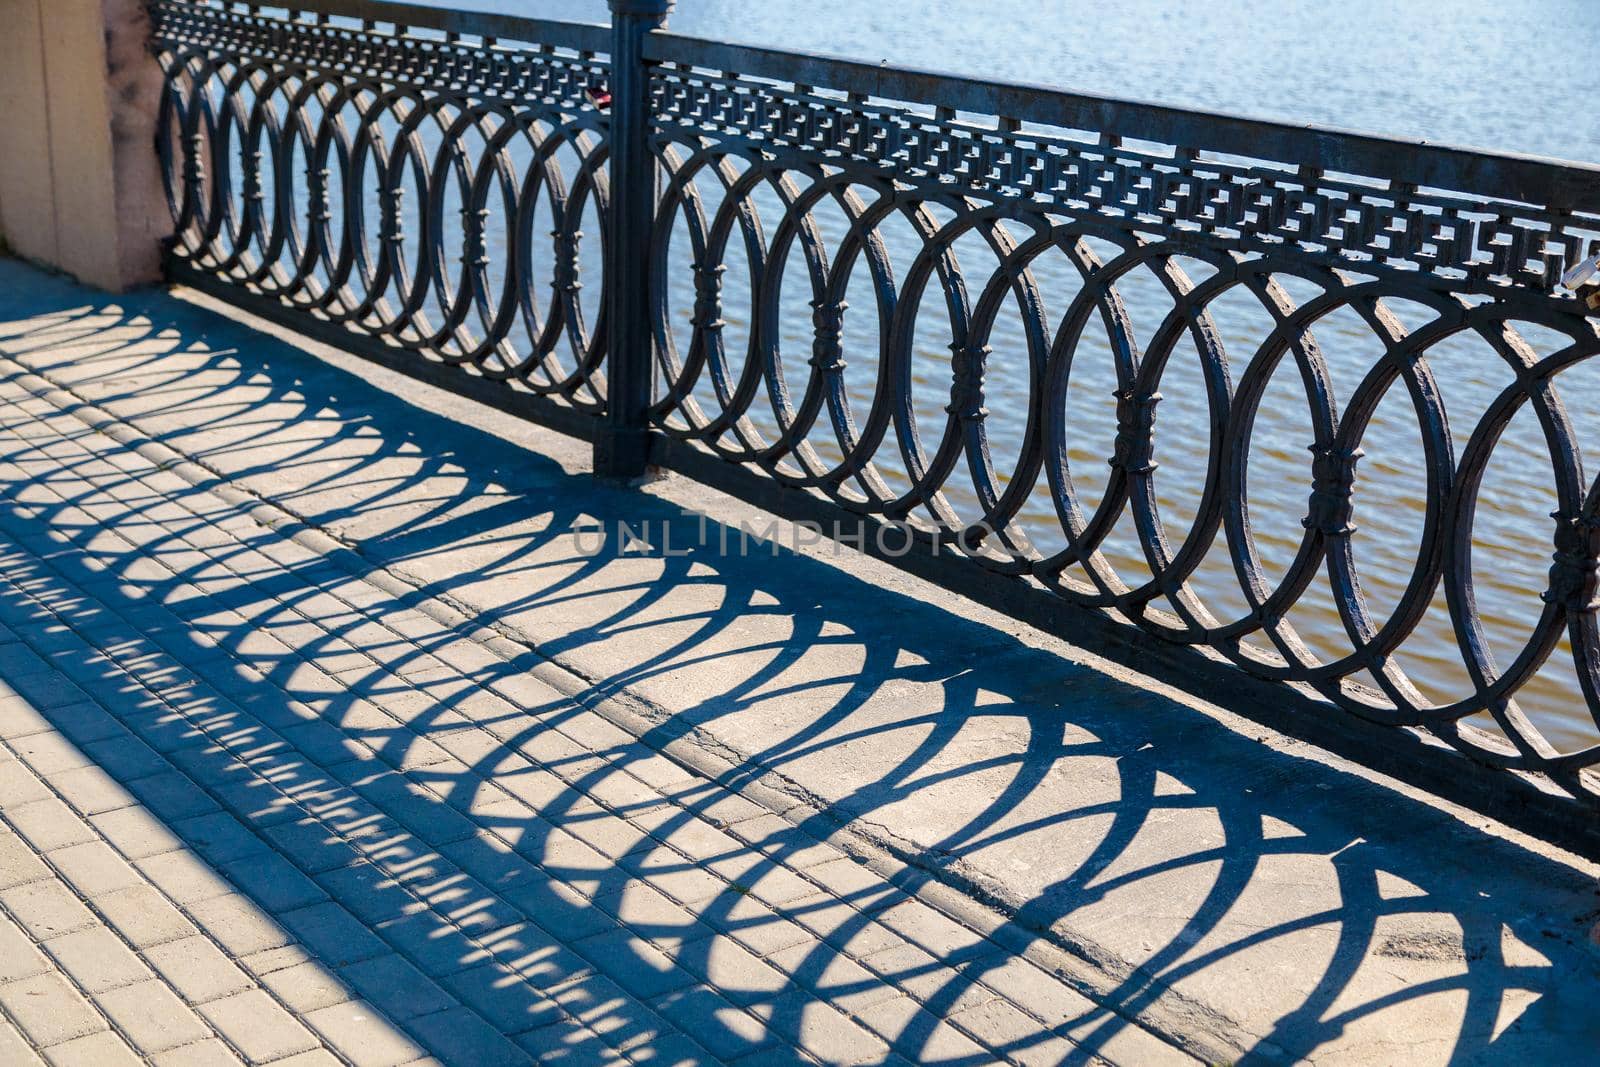 Shadows on a sunny day from the metal railings on the bridge over the river.